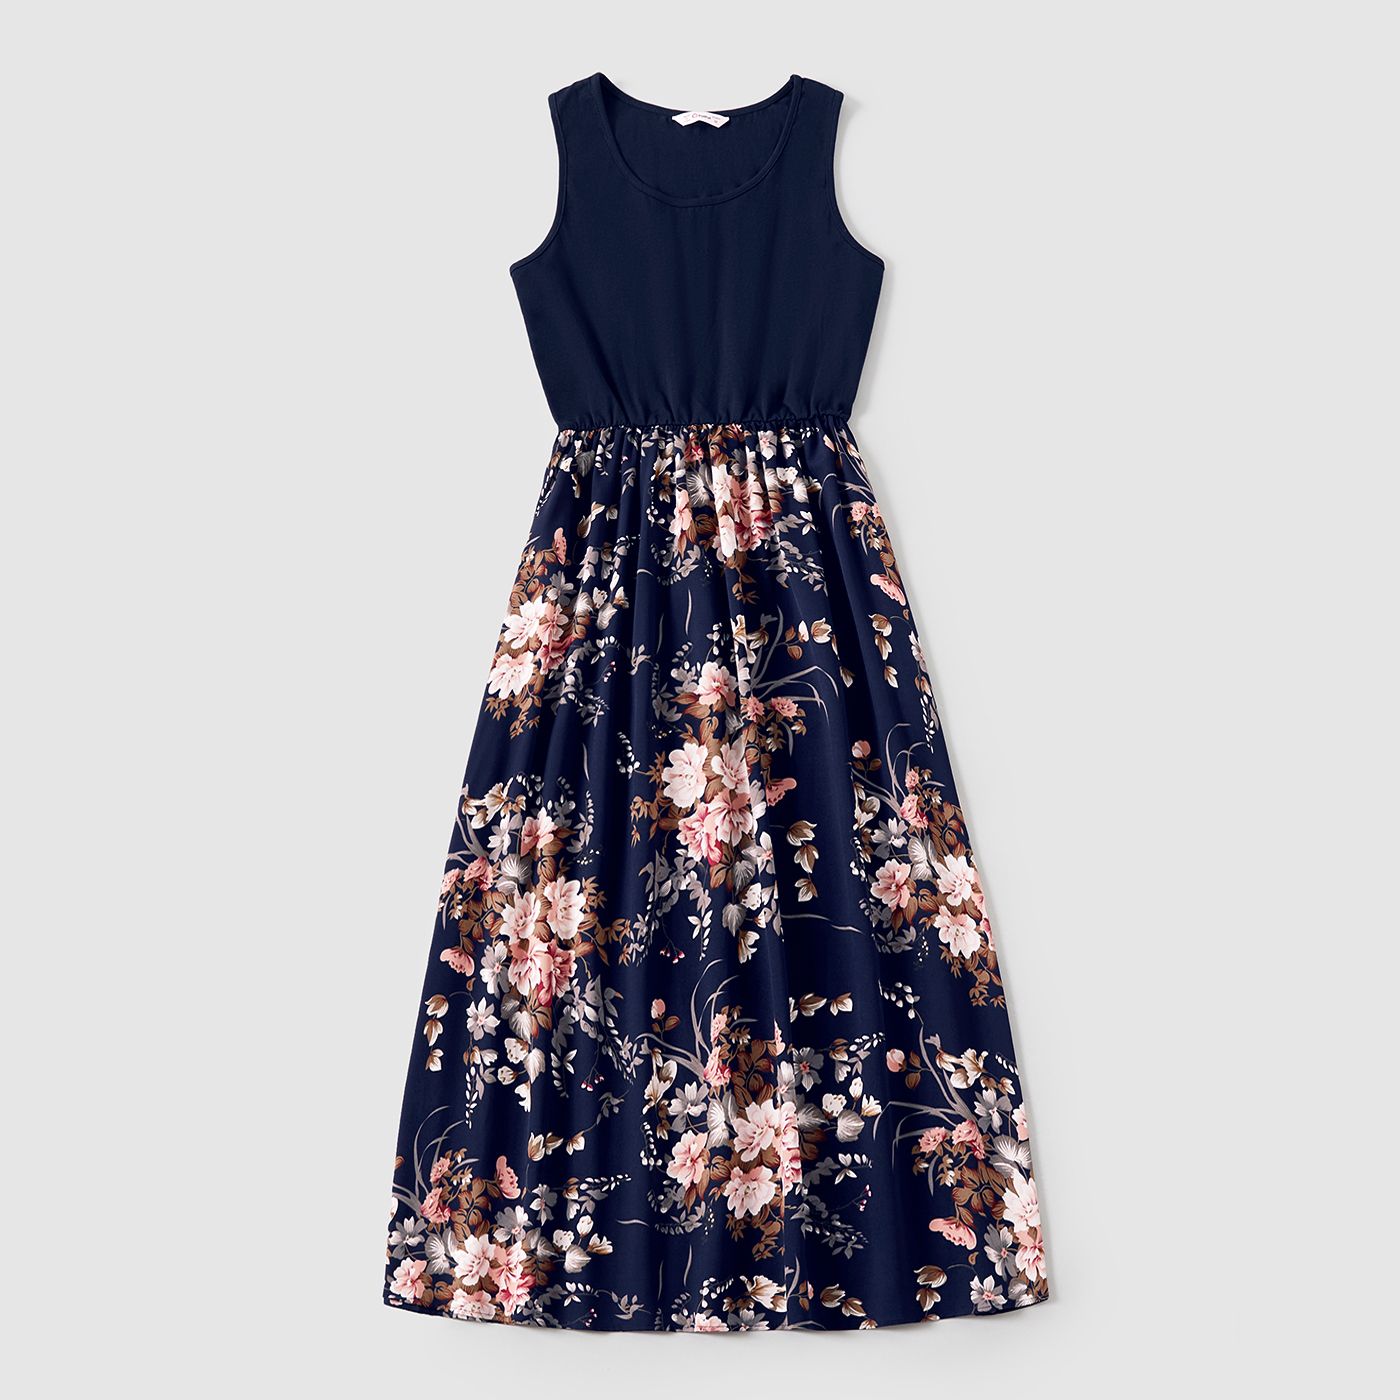 Family Matching Sleeveless Floral Print Spliced Midi Dresses And Short-sleeve Striped T-shirts Sets